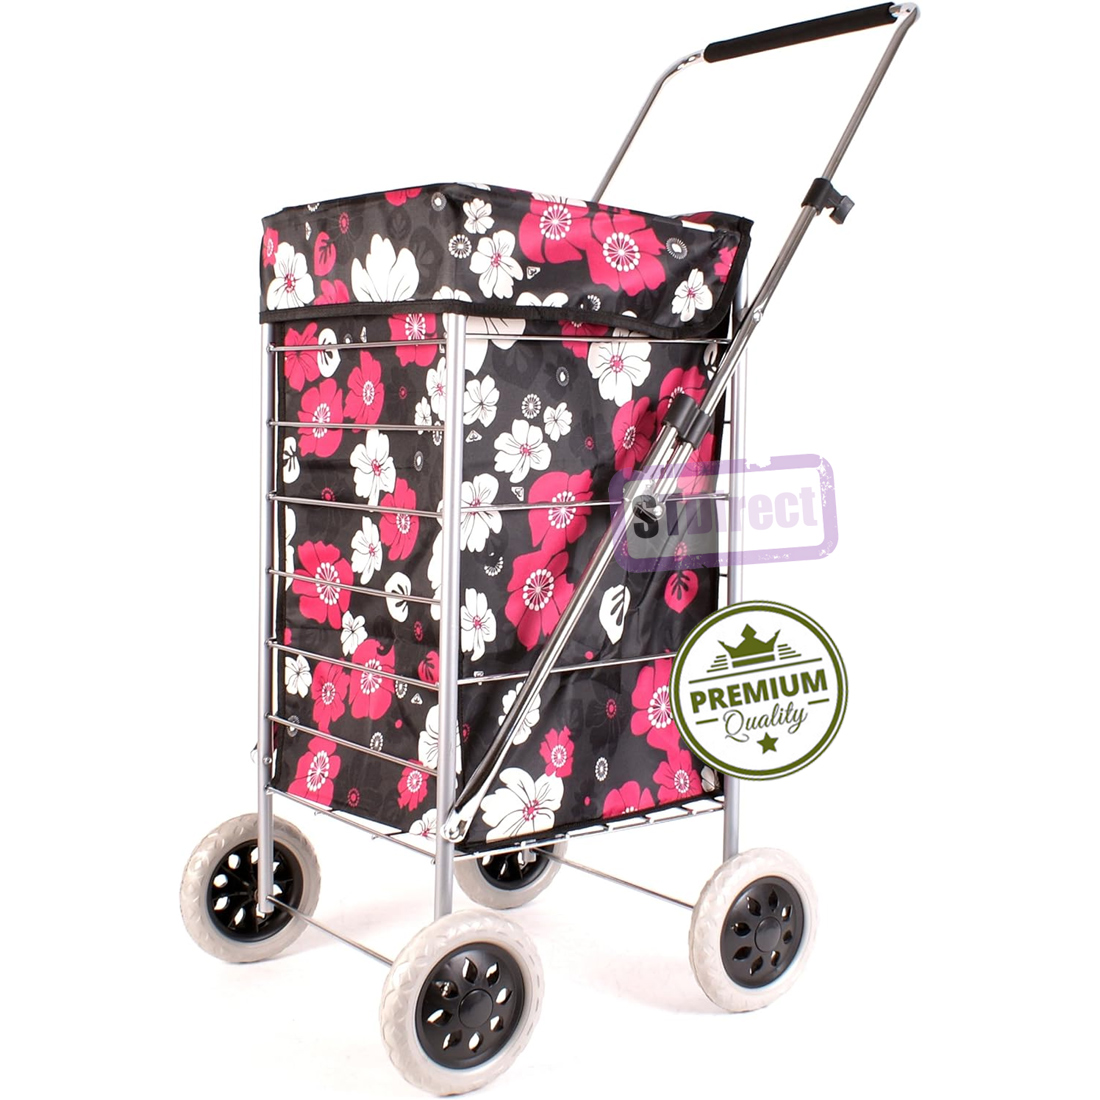 Colorado Premium Wheel Trolley with Adjustable Handle Black with Pink and White Floral Print, Funky / Trendy